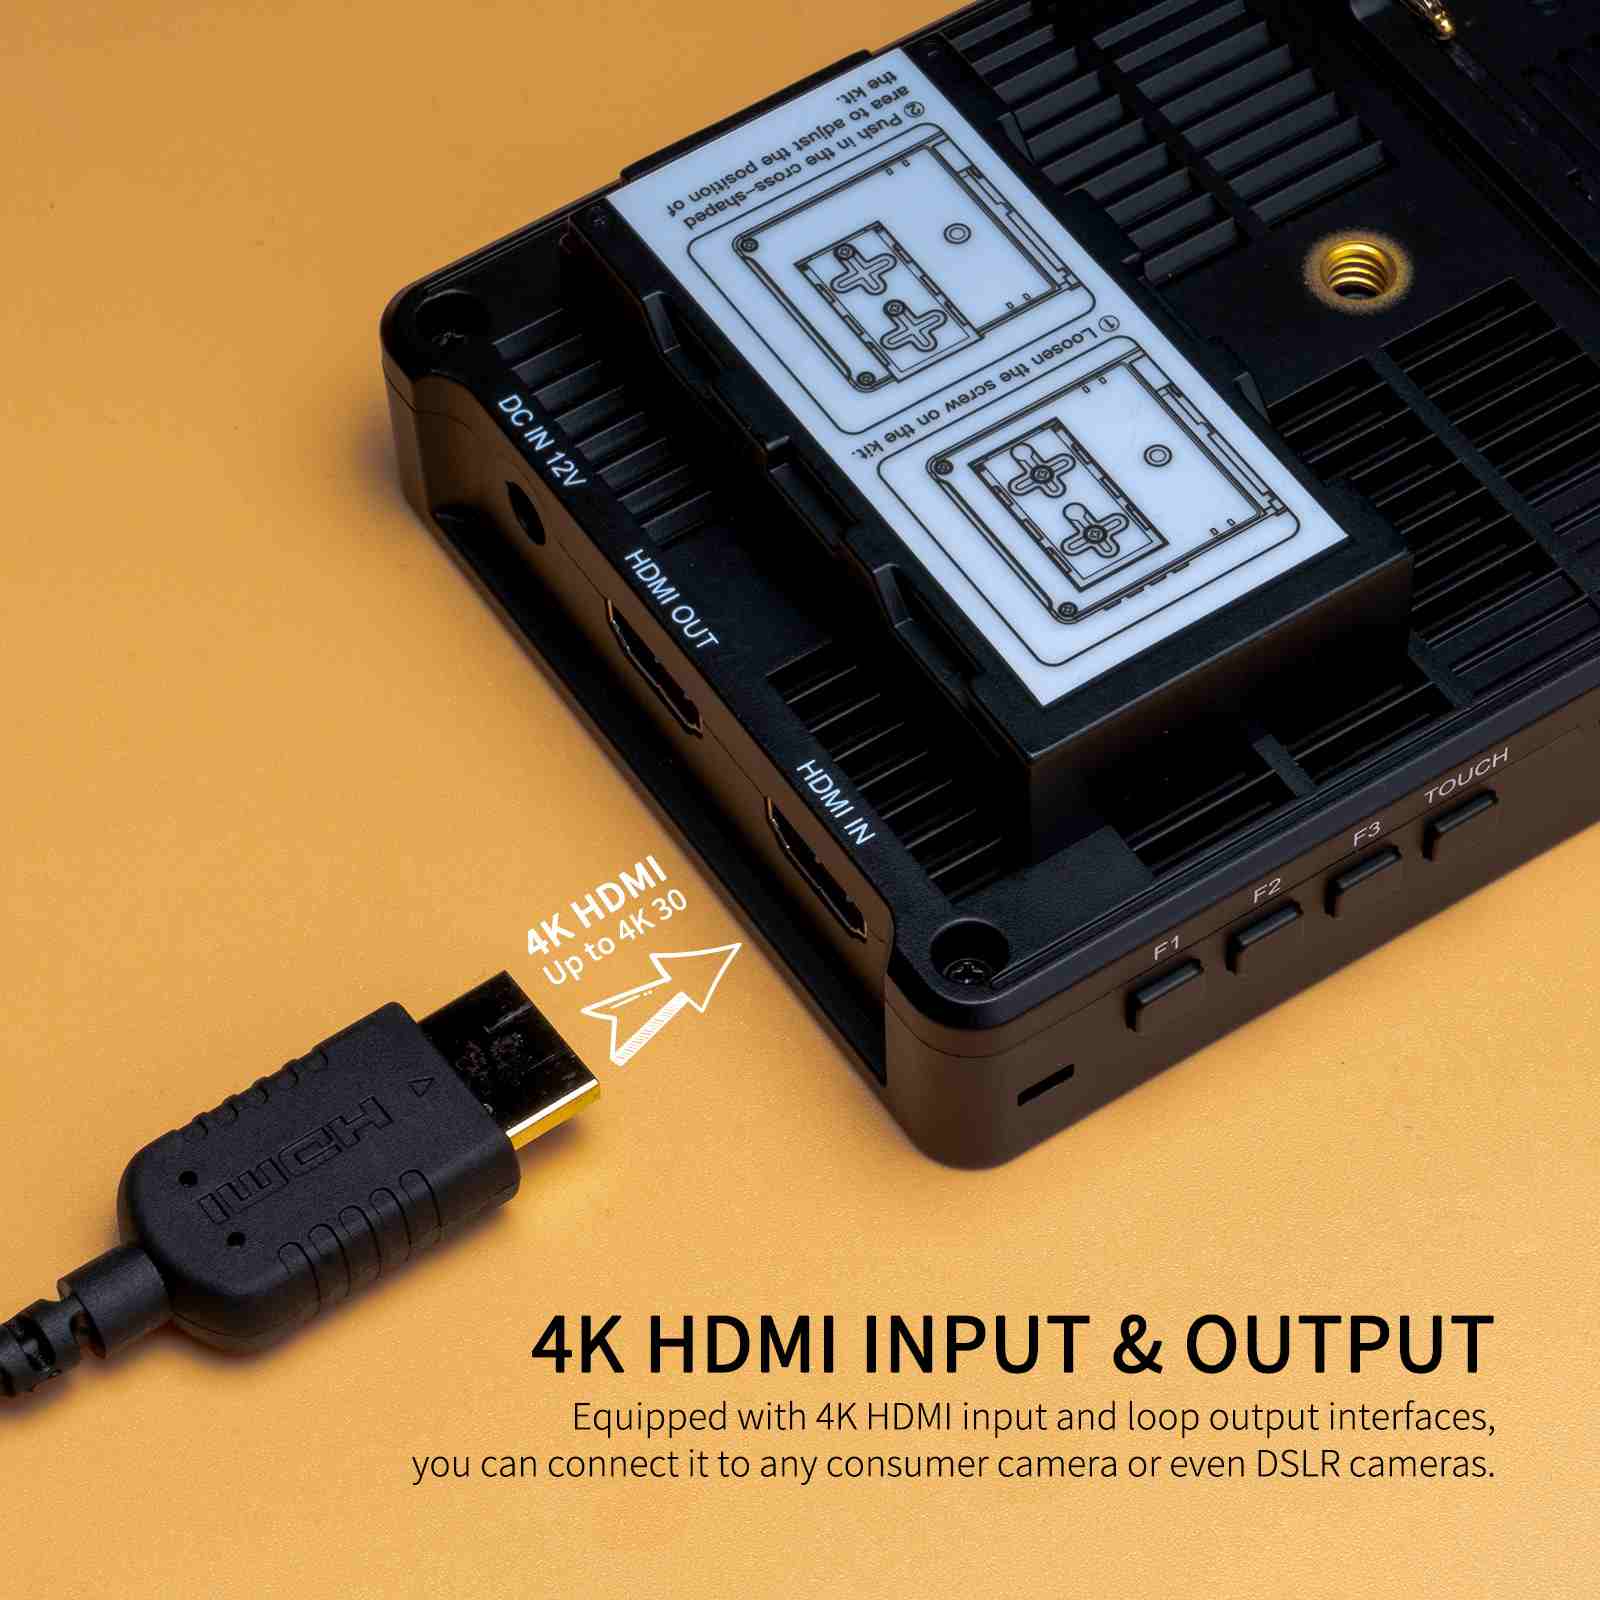 HDMI Cable Power removes the need for a separate power connector